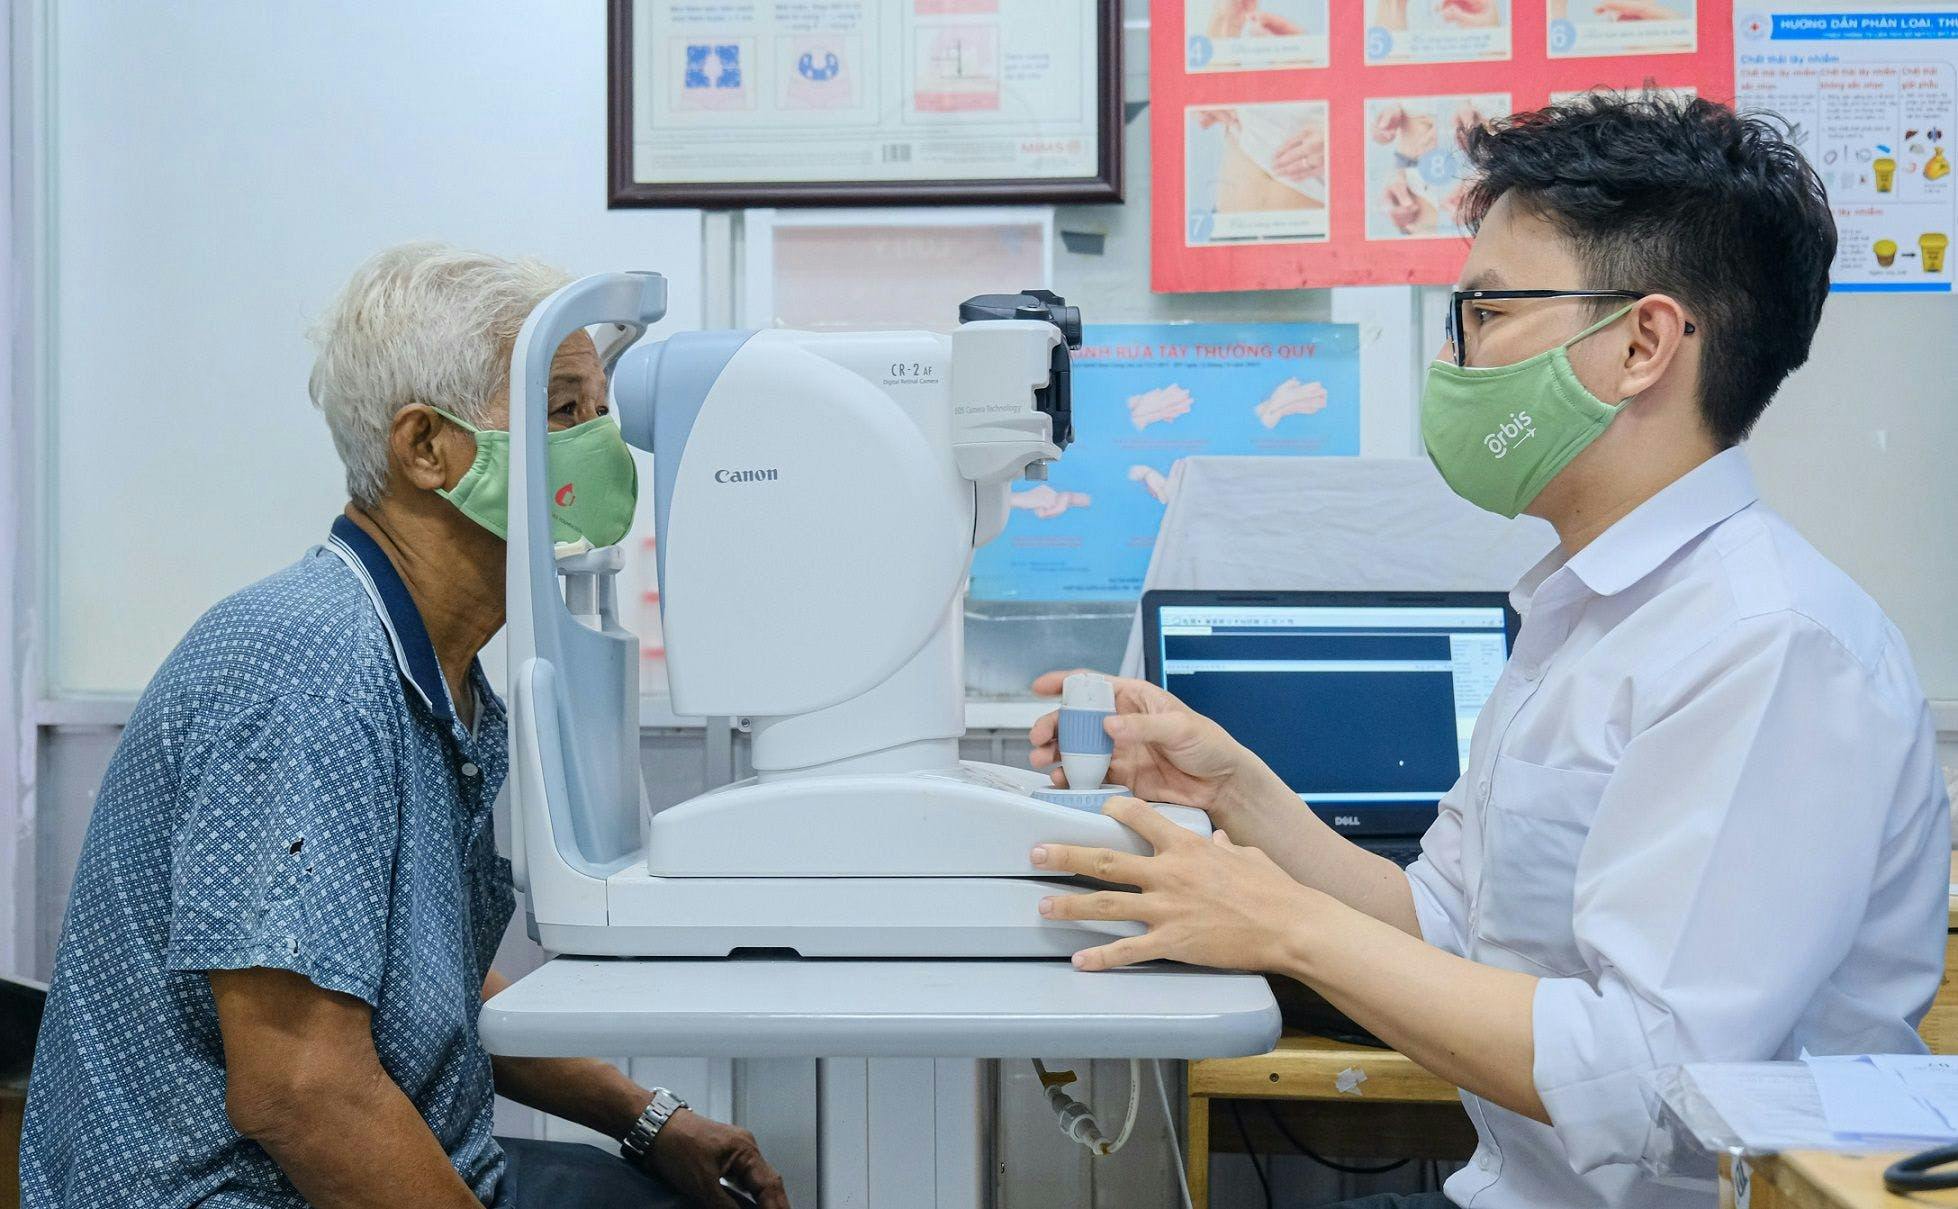 An eye doctor at Orbis Vietnam’s partner hospital Thu Duc Hospital performs an eye examination on a patient with diabetes. (Images courtesy of Orbis International)